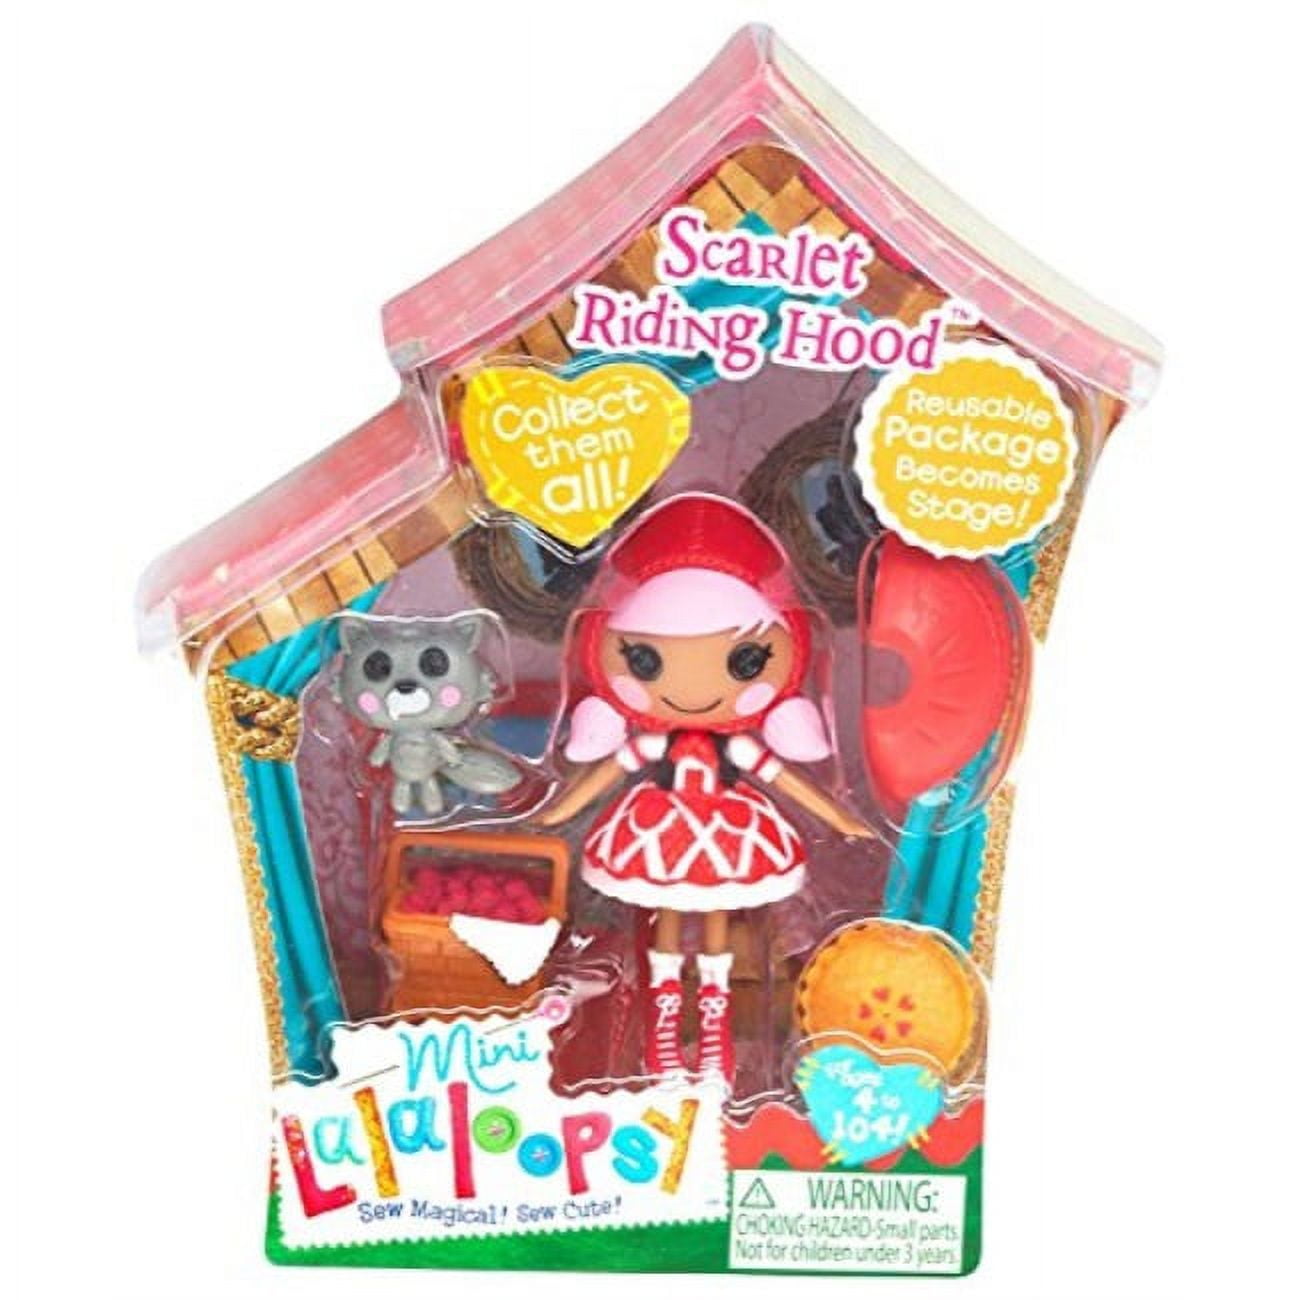 New Toys Mini Lalaloopsy Doll Collection Figures Dolls For Girls Kids -  Supply Epic